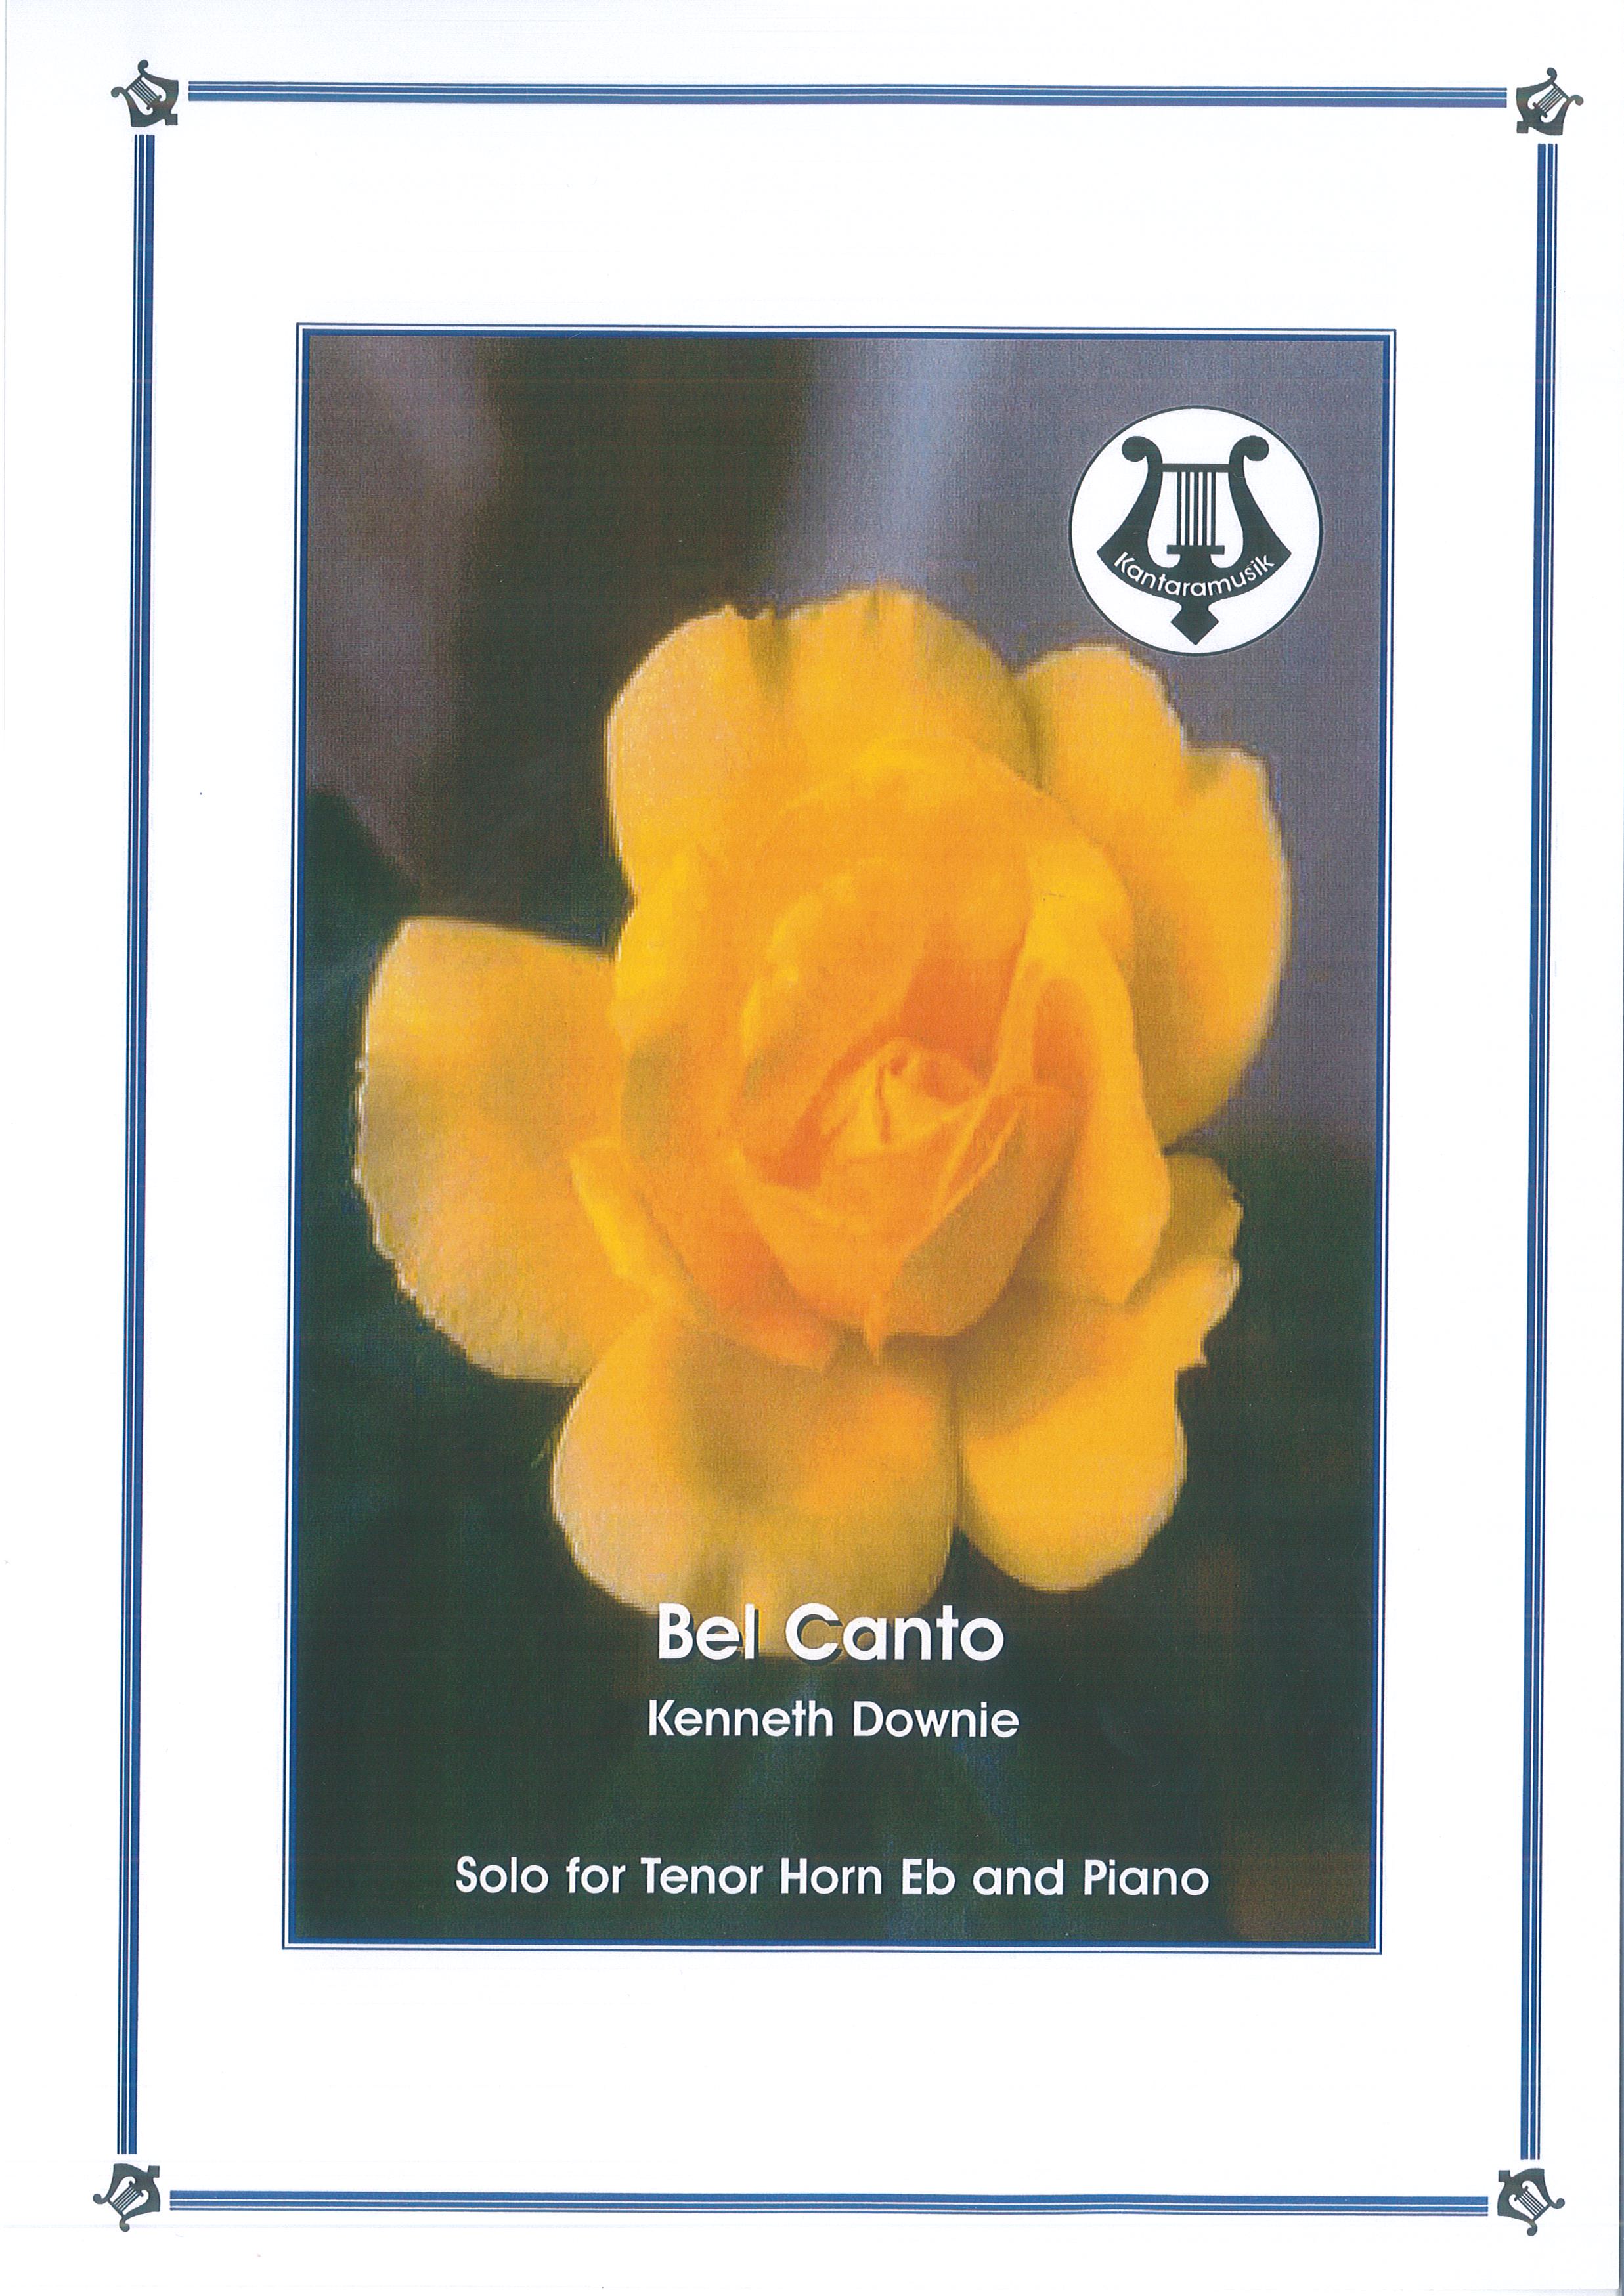 Bel Canto (Tenor Horn and Piano)